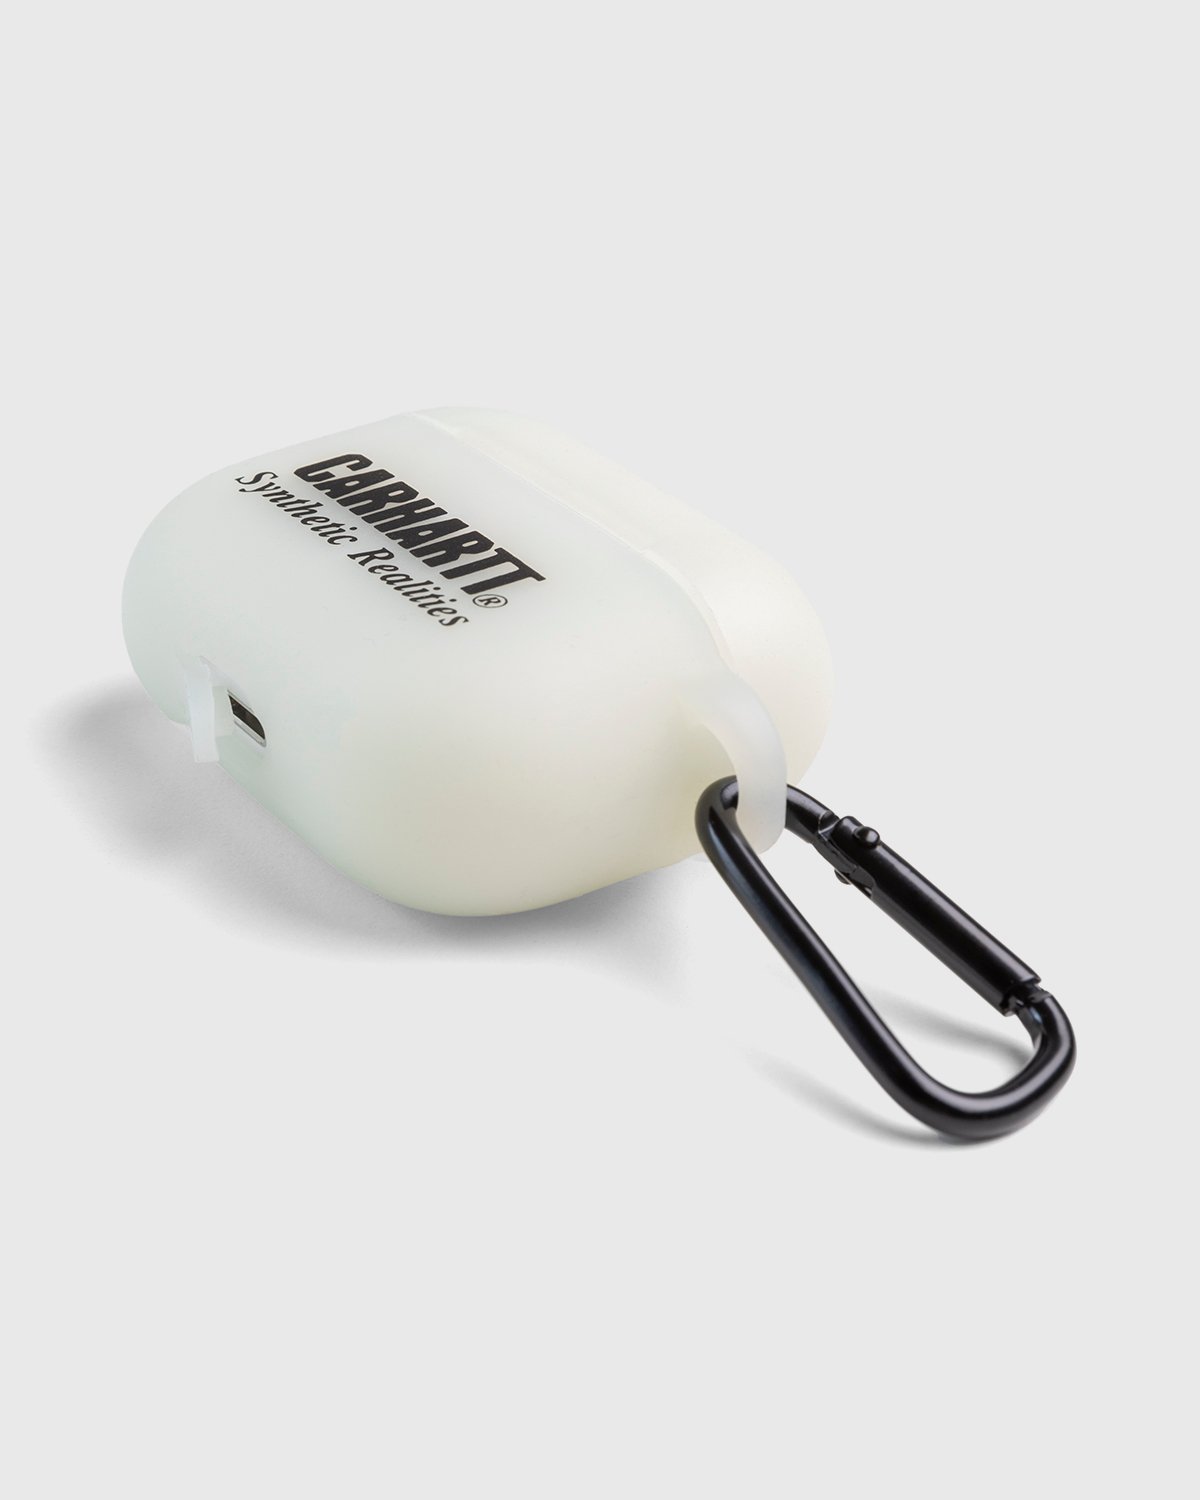 Carhartt WIP - Synthetic Realities AirPods Case Glow In The Dark Black - Accessories - White - Image 3